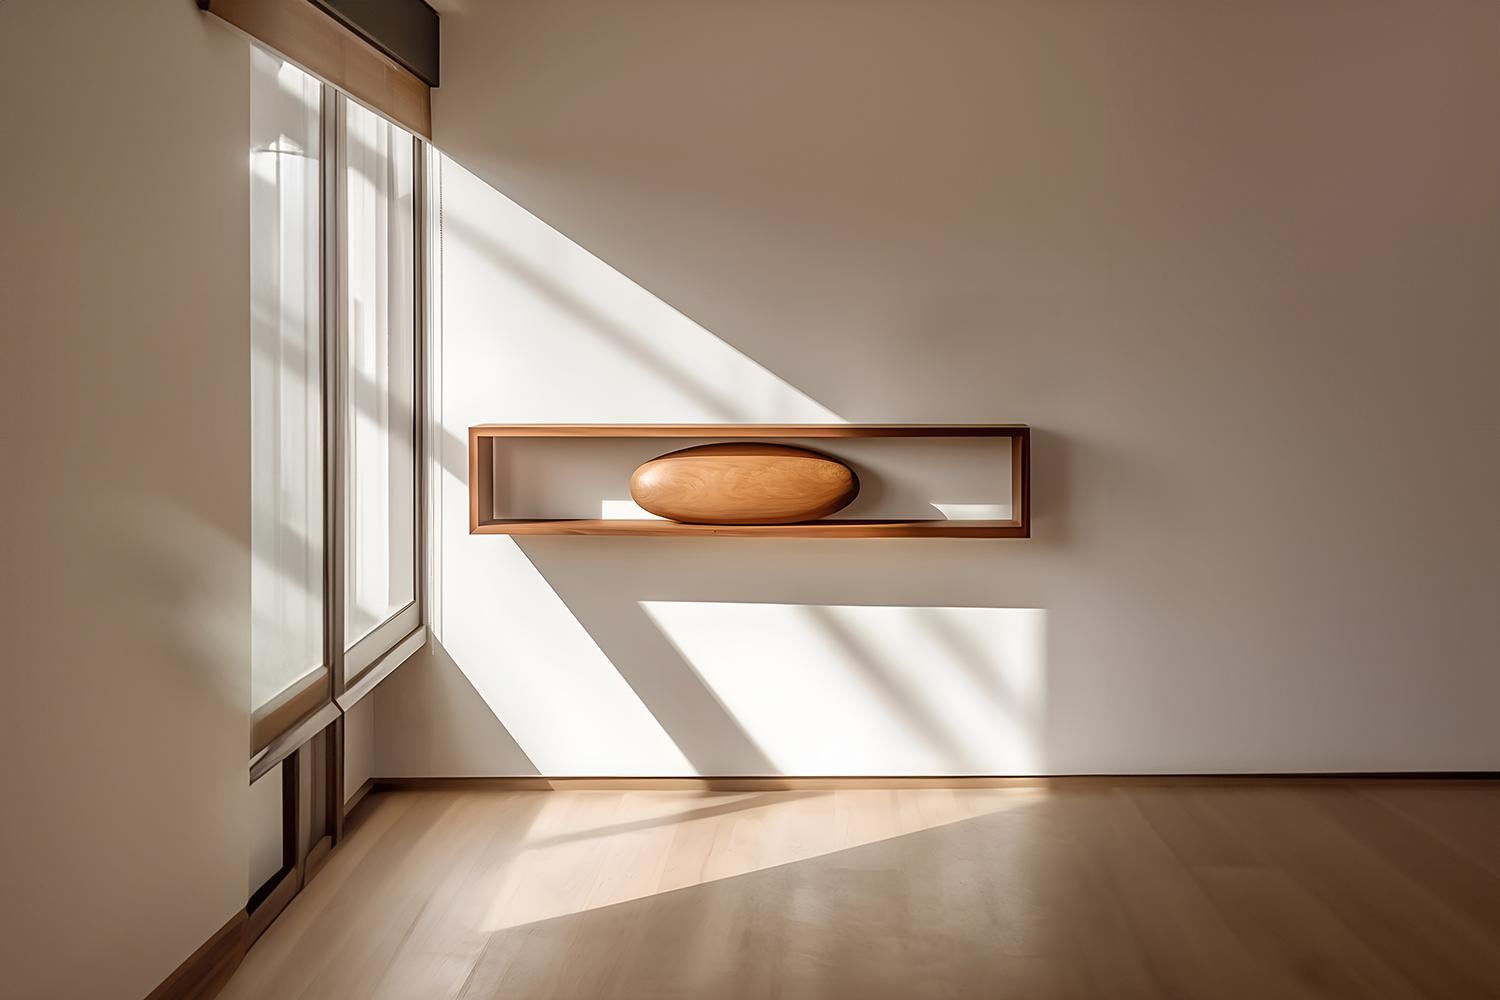 Large Rectangular Floating Shelf with One Sculptural Wooden Pebble Accent, Sereno by Joel Escalona

—

What happens when the practical becomes art?
What happens when ornamentation gains significance?

Those were the questions Joel Escalona